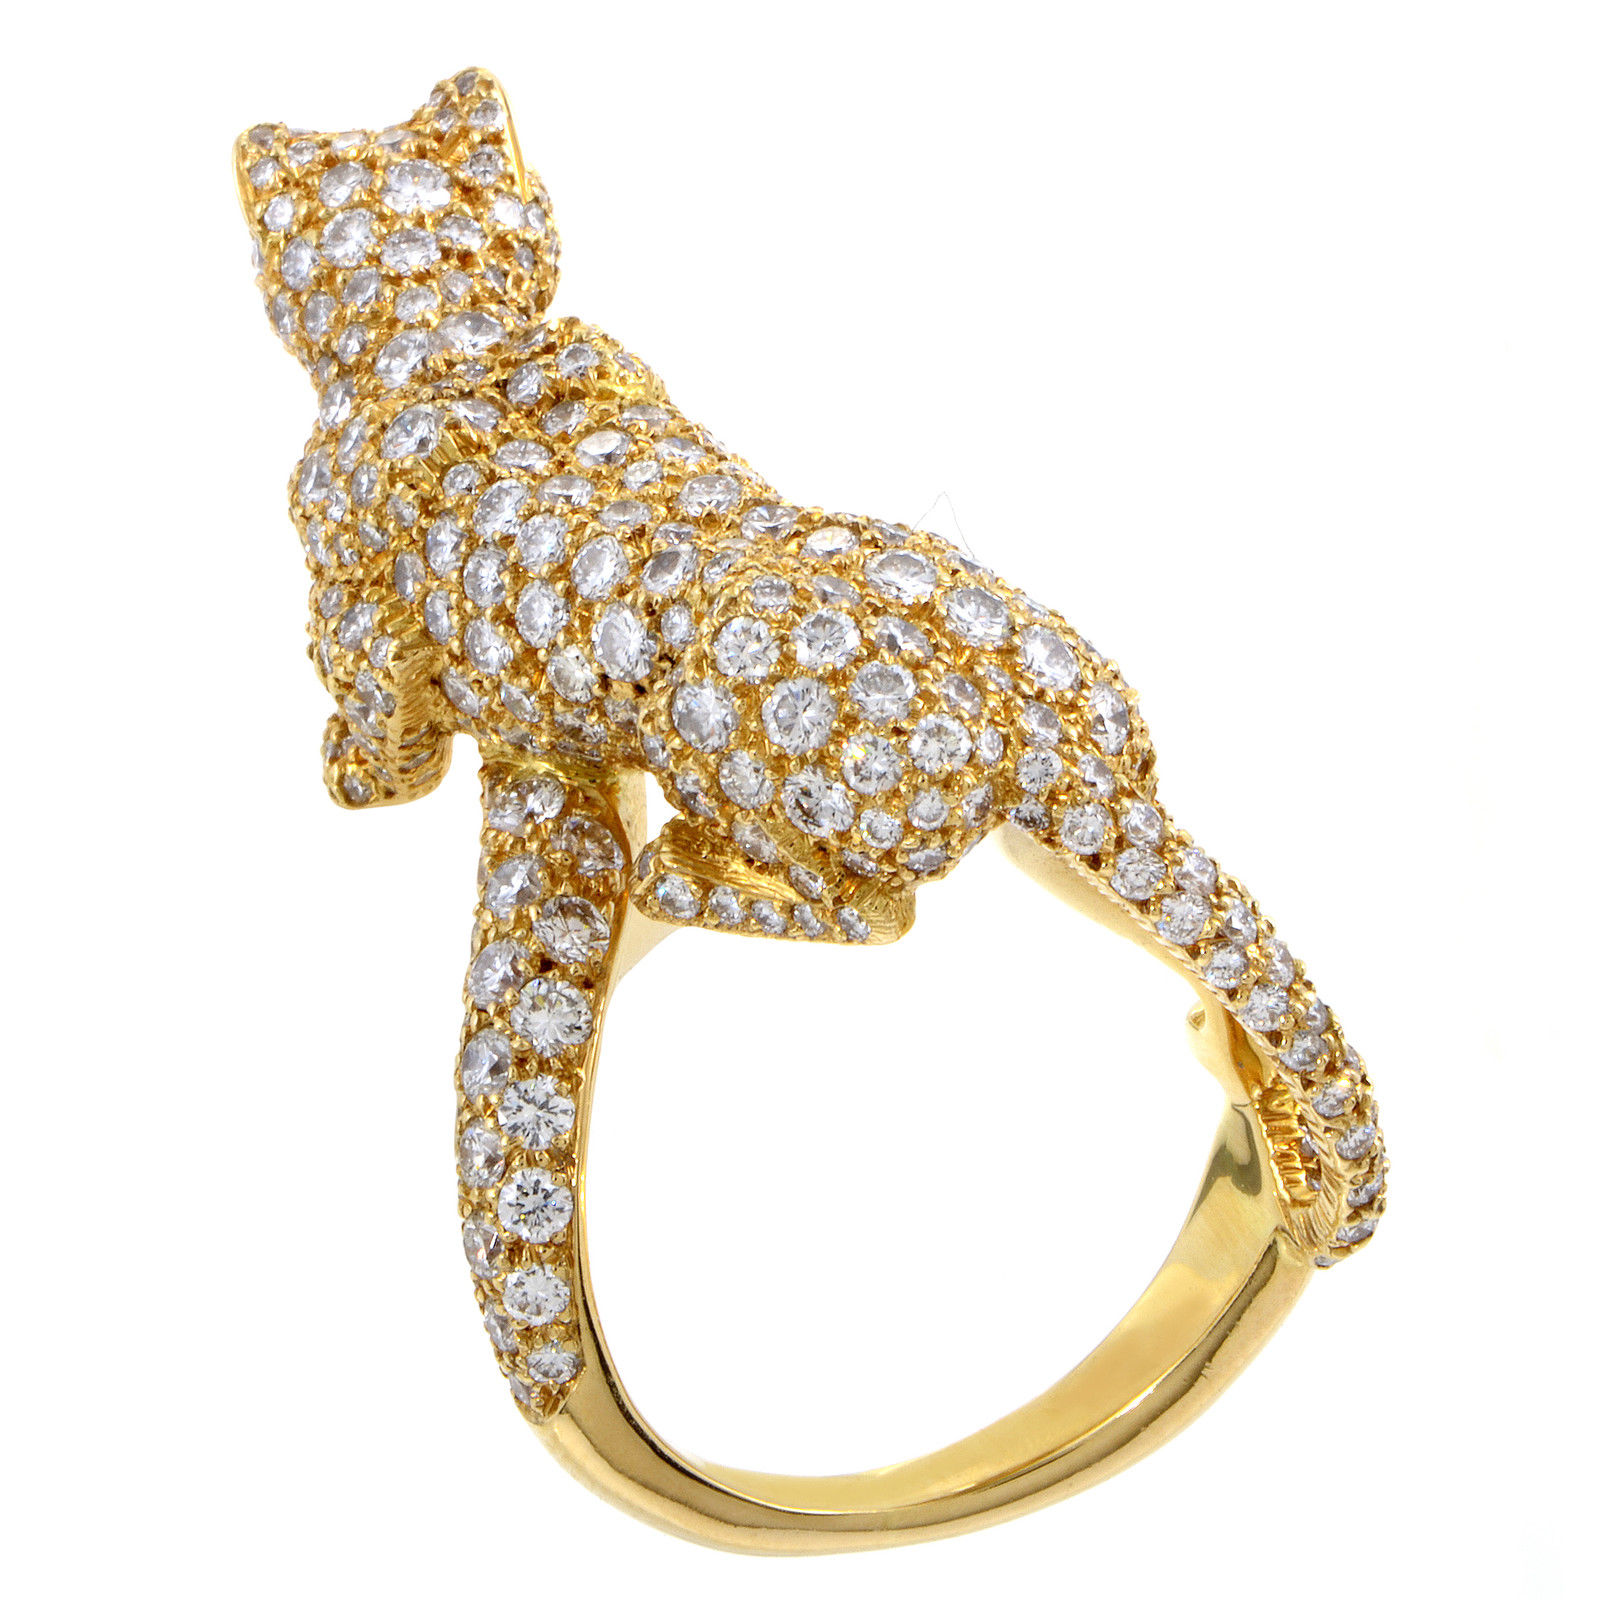 Cartier Panthere Women's 18K Yellow Gold Full Diamond Pave Ring